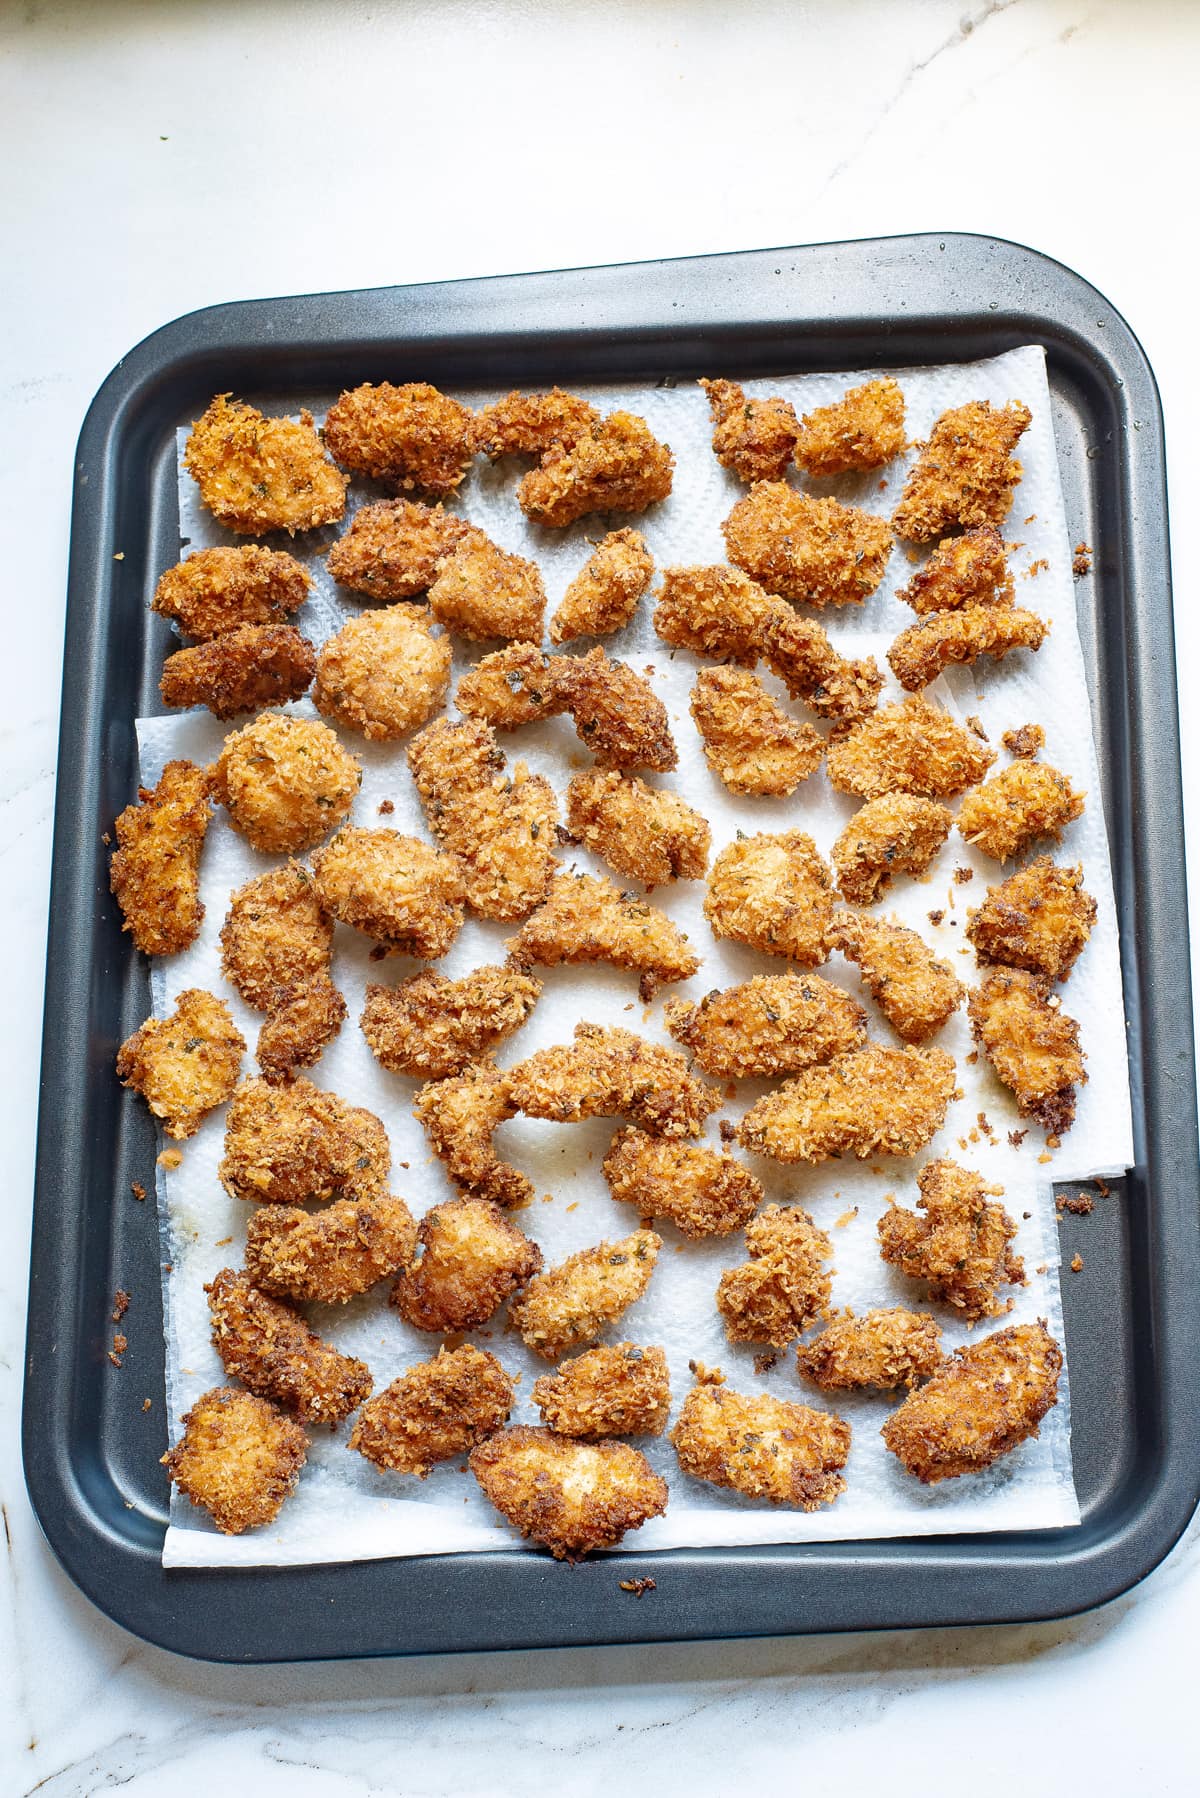 Pieces of fried chicken bites on paper towels